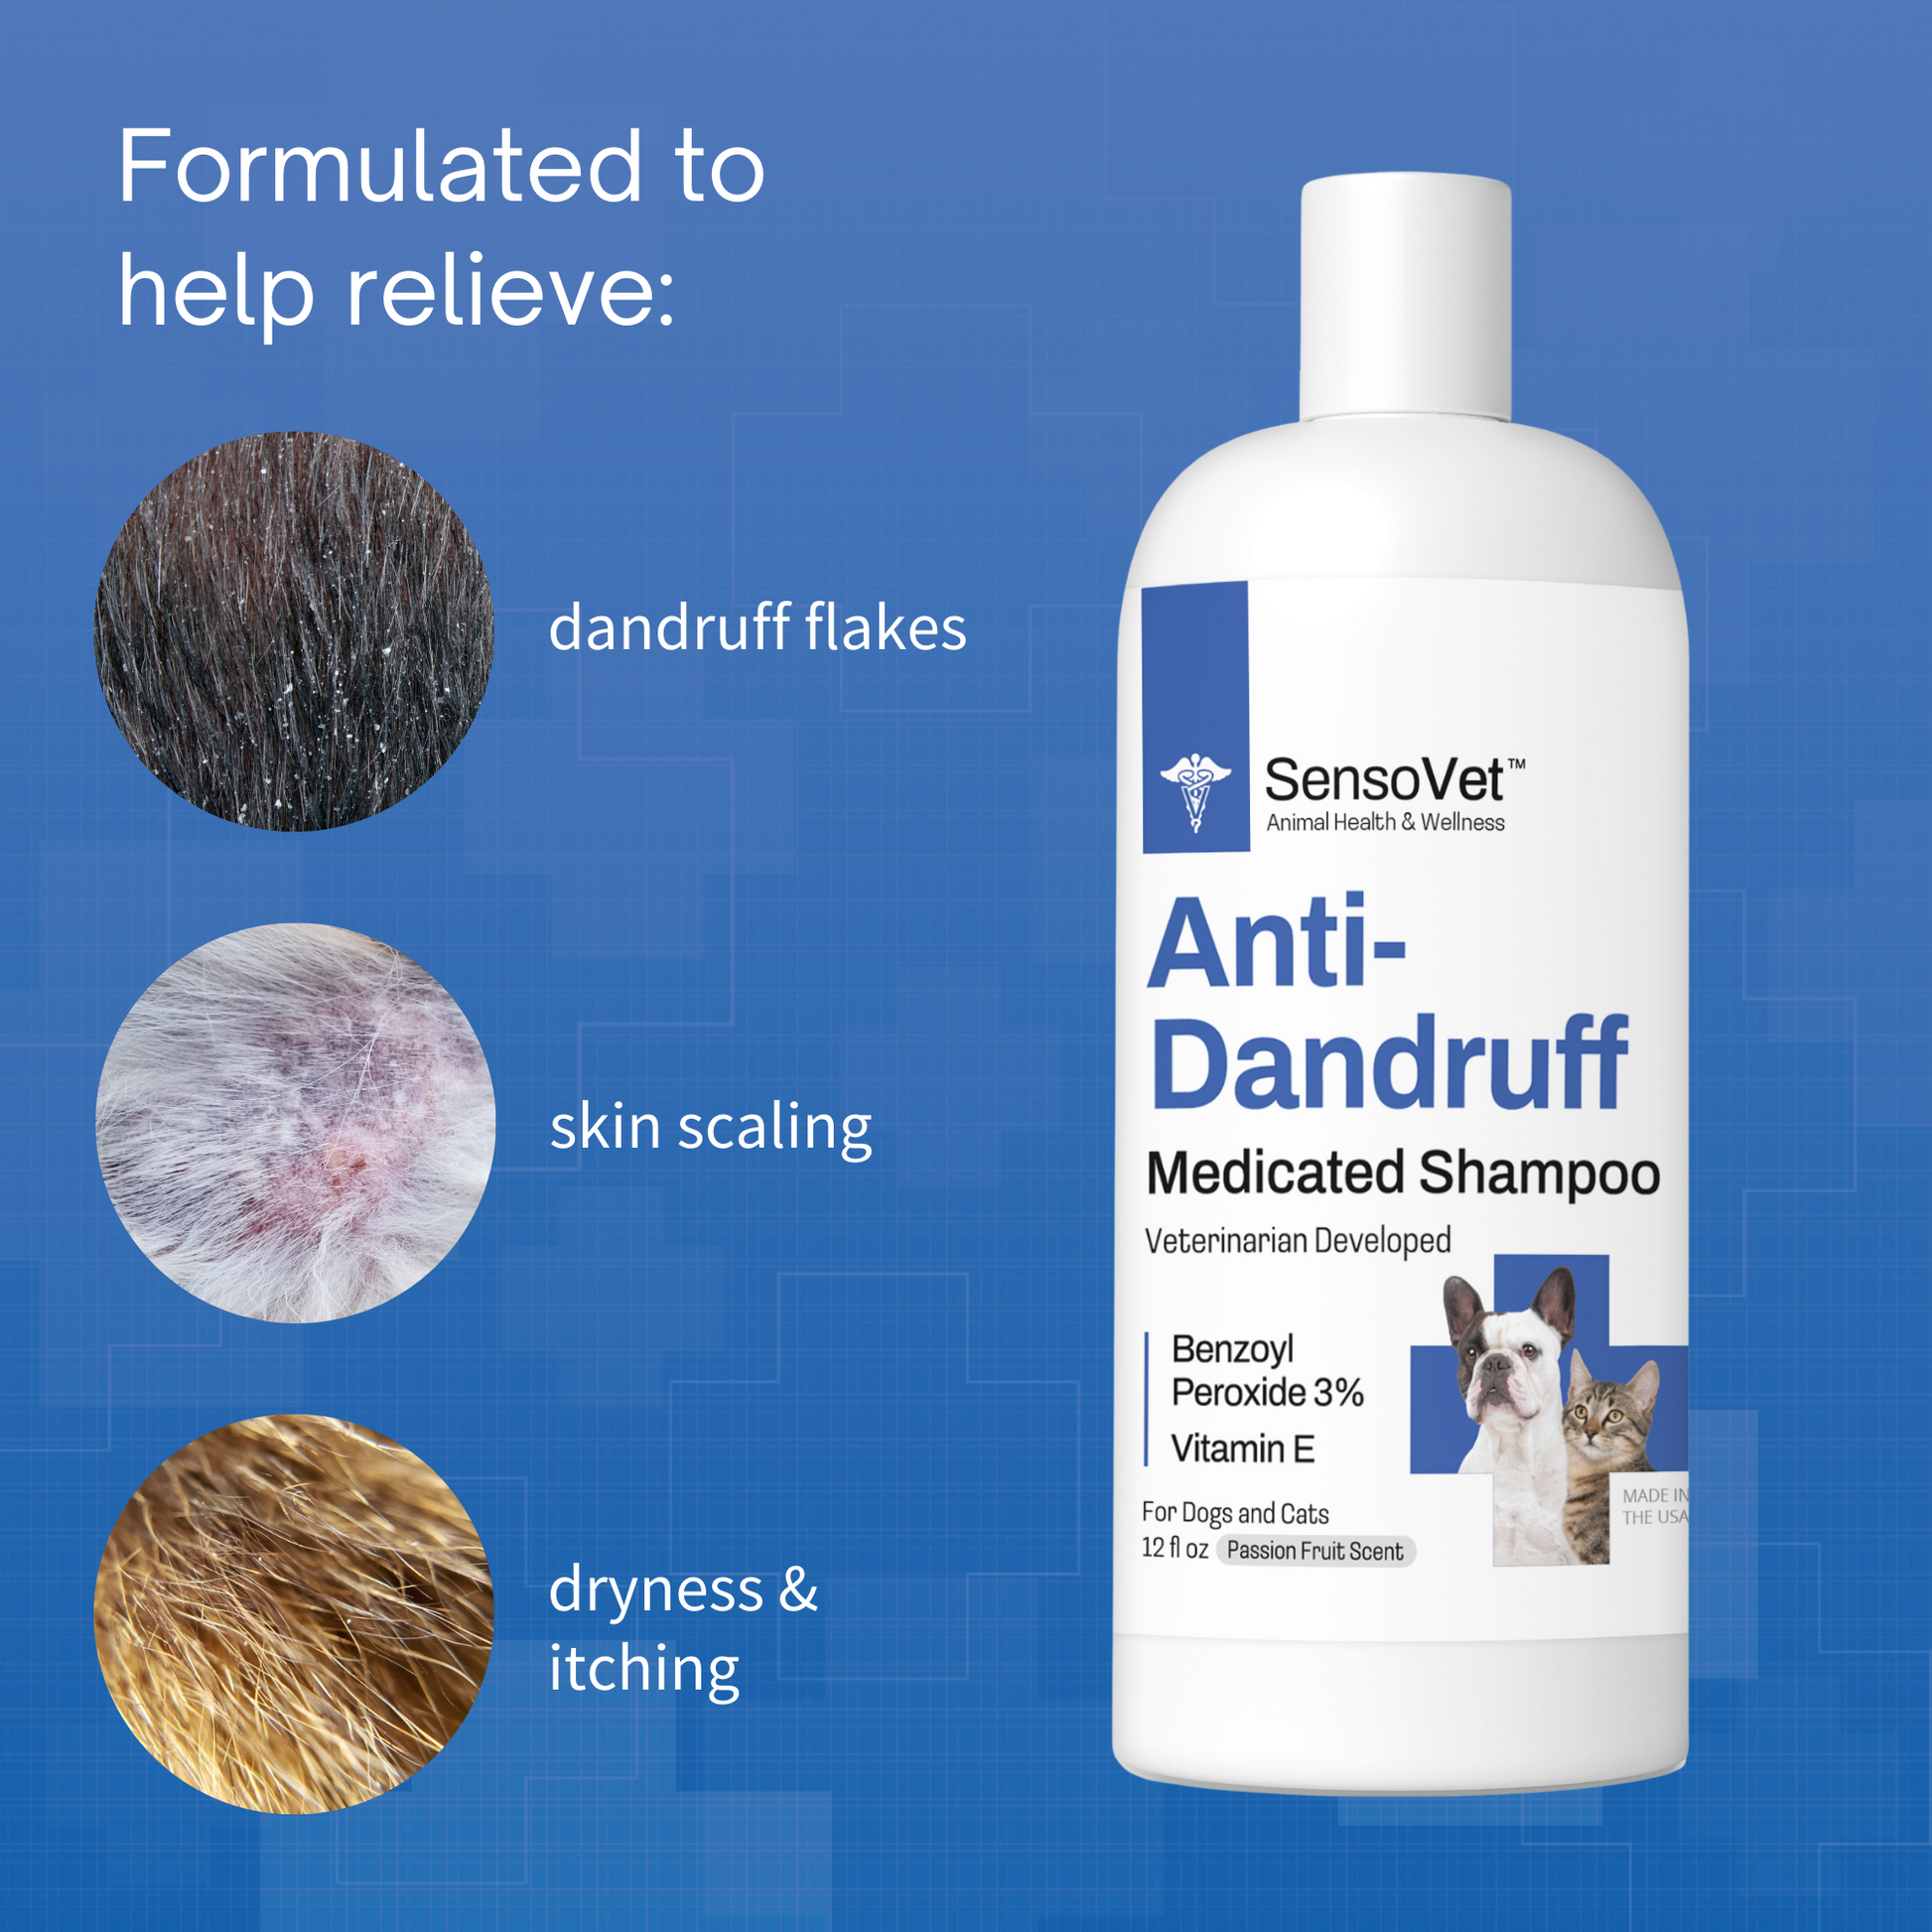 Formulated to help relieve dandruff flakes, skin scaling, dryness and itching